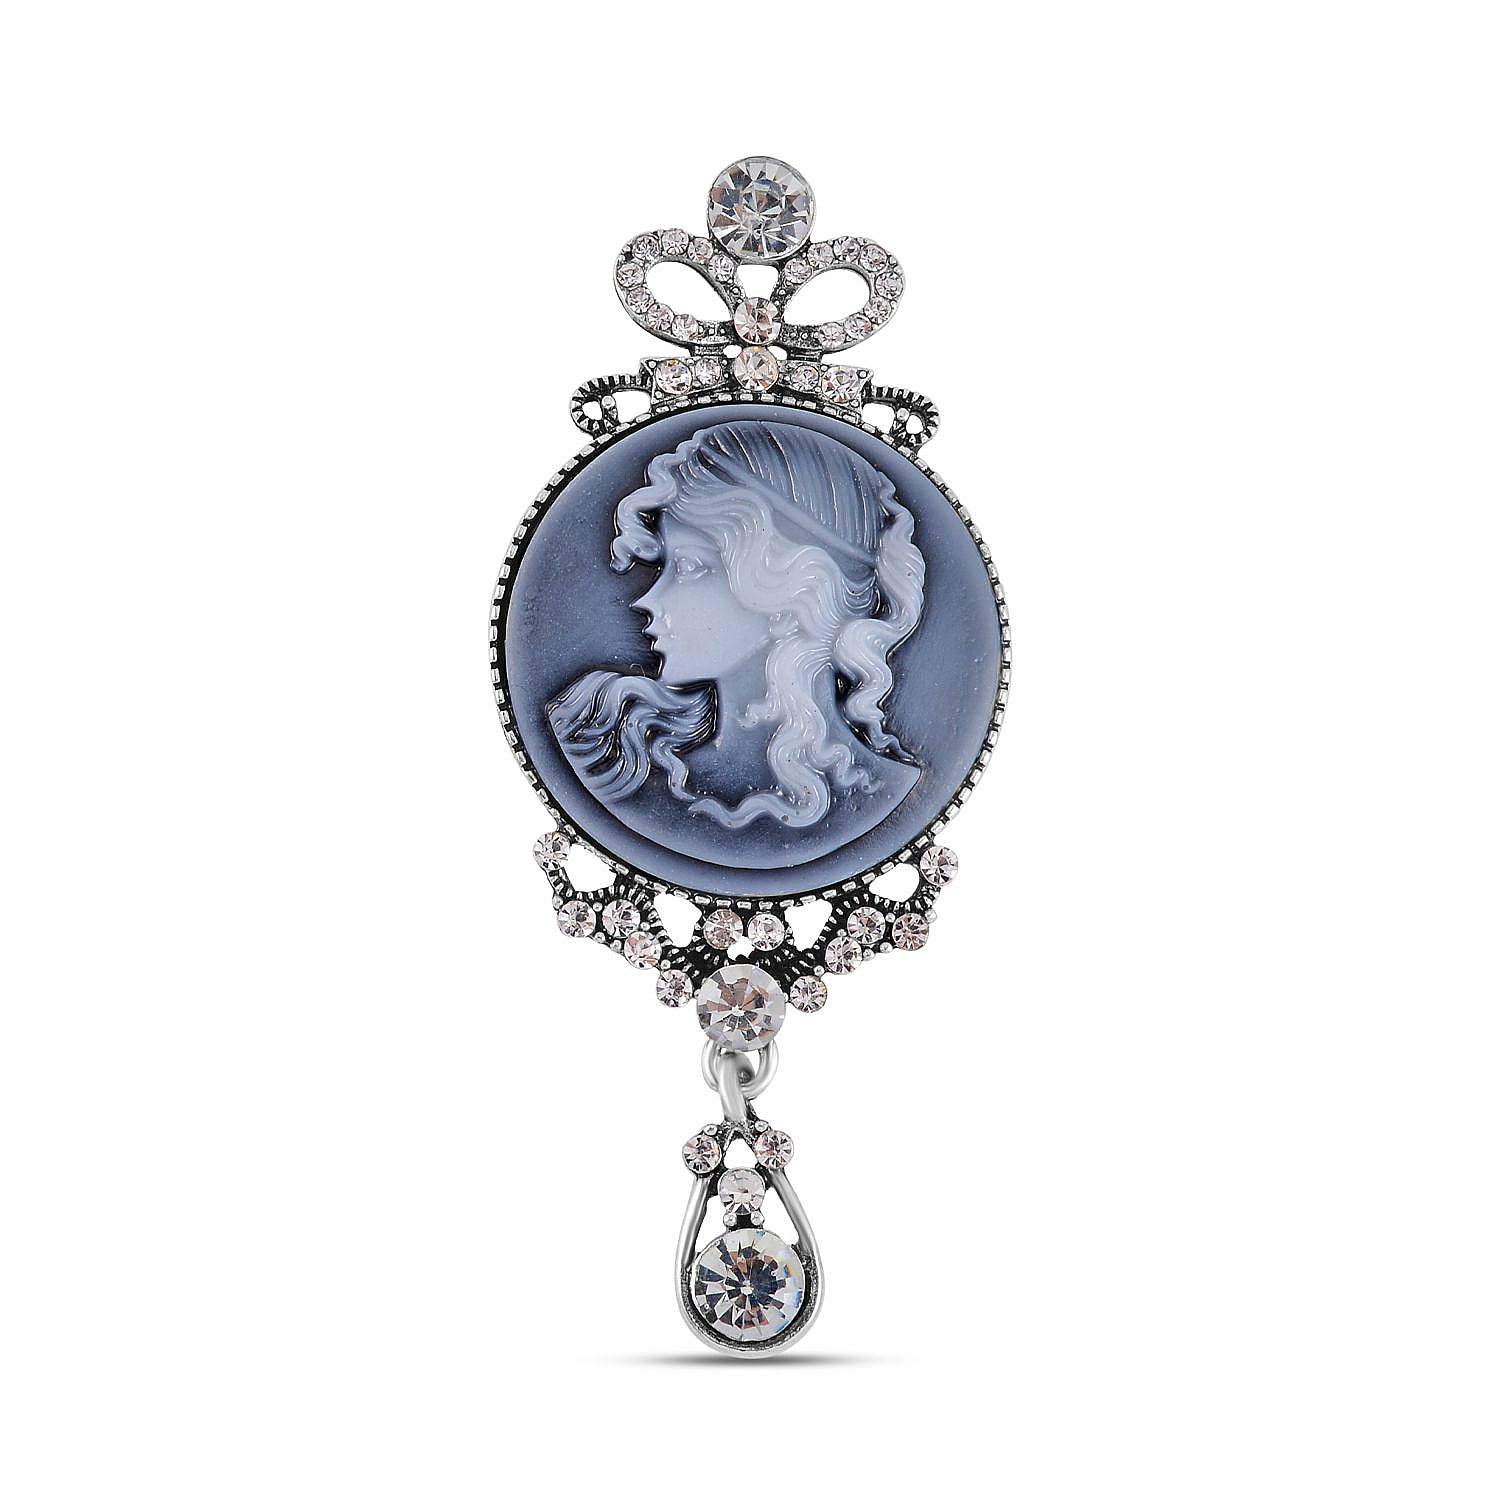 Cameo & White Austrian Crystal Brooch in Silver Tone